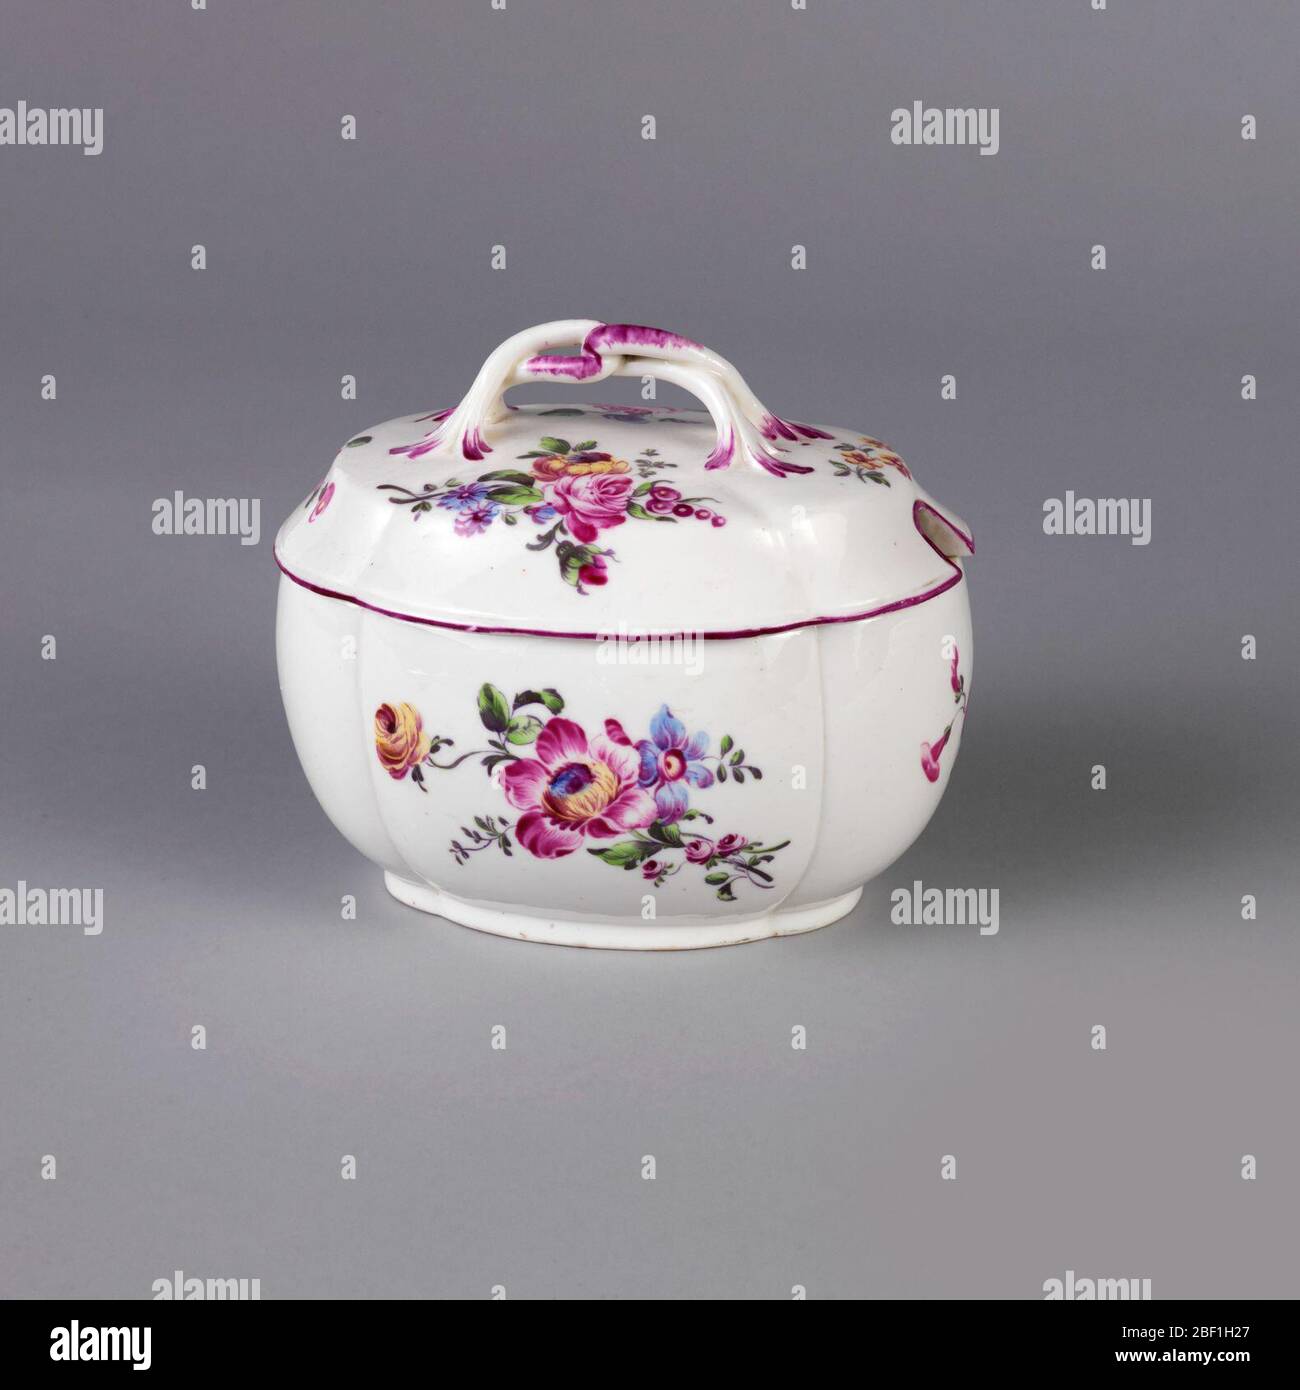 Sugar bowl lid and tray. Round bowl with large scalloped edges; lid has plant form loop handle. Lid rim is painted in deep purple. Decorated with deep pink-purple, yellow and blue blossoms and green leaves and stems on white background. Bowl's interior has painted green leaf. Stock Photo